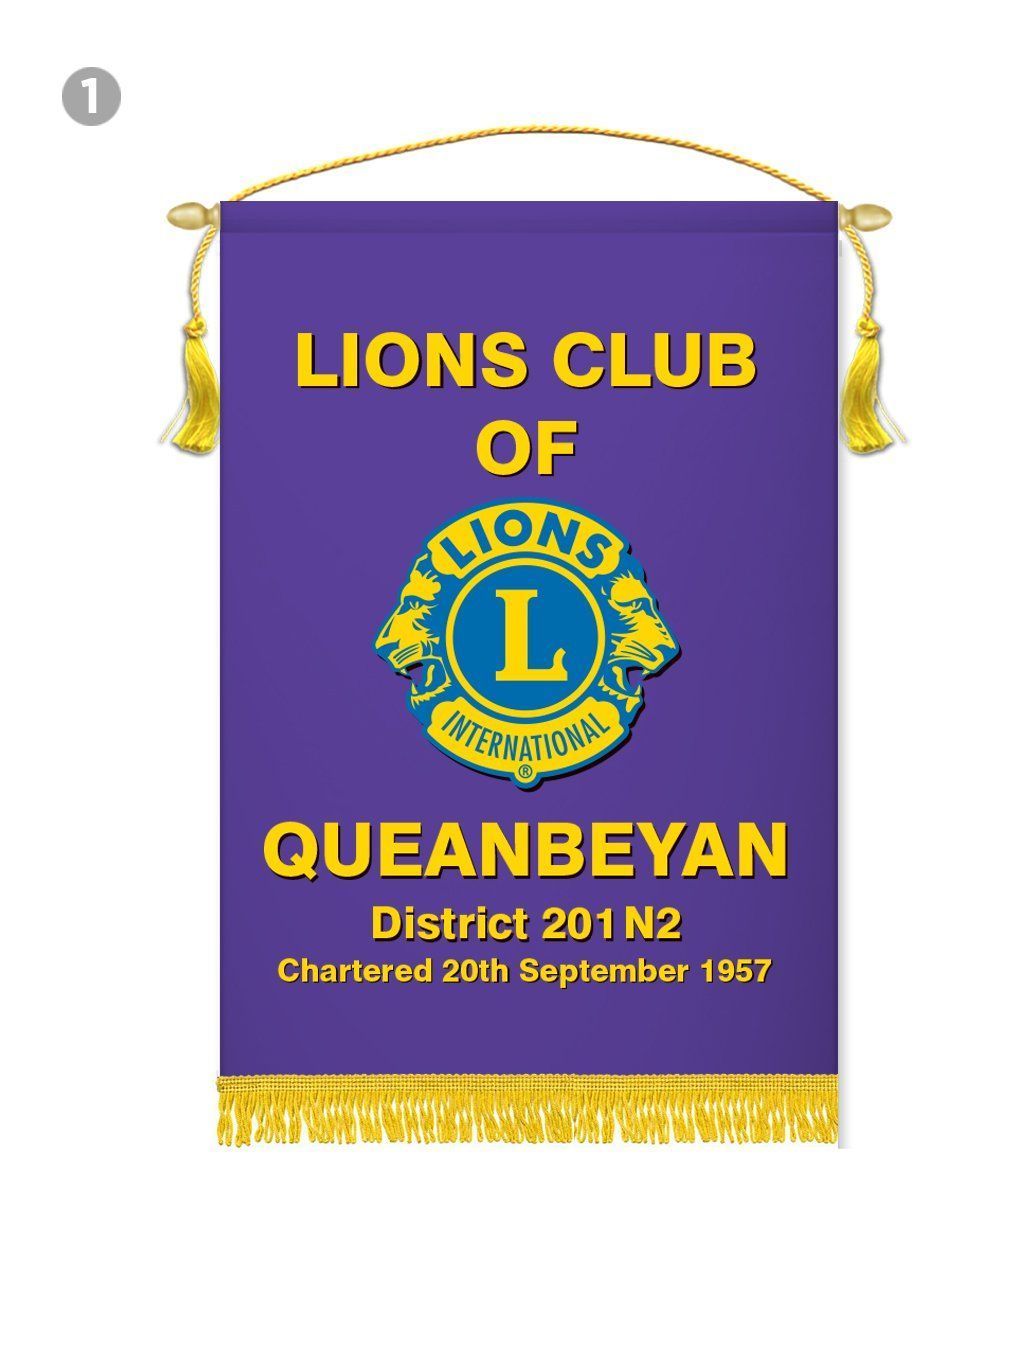 Miss G. reccomend Jokes about lions club